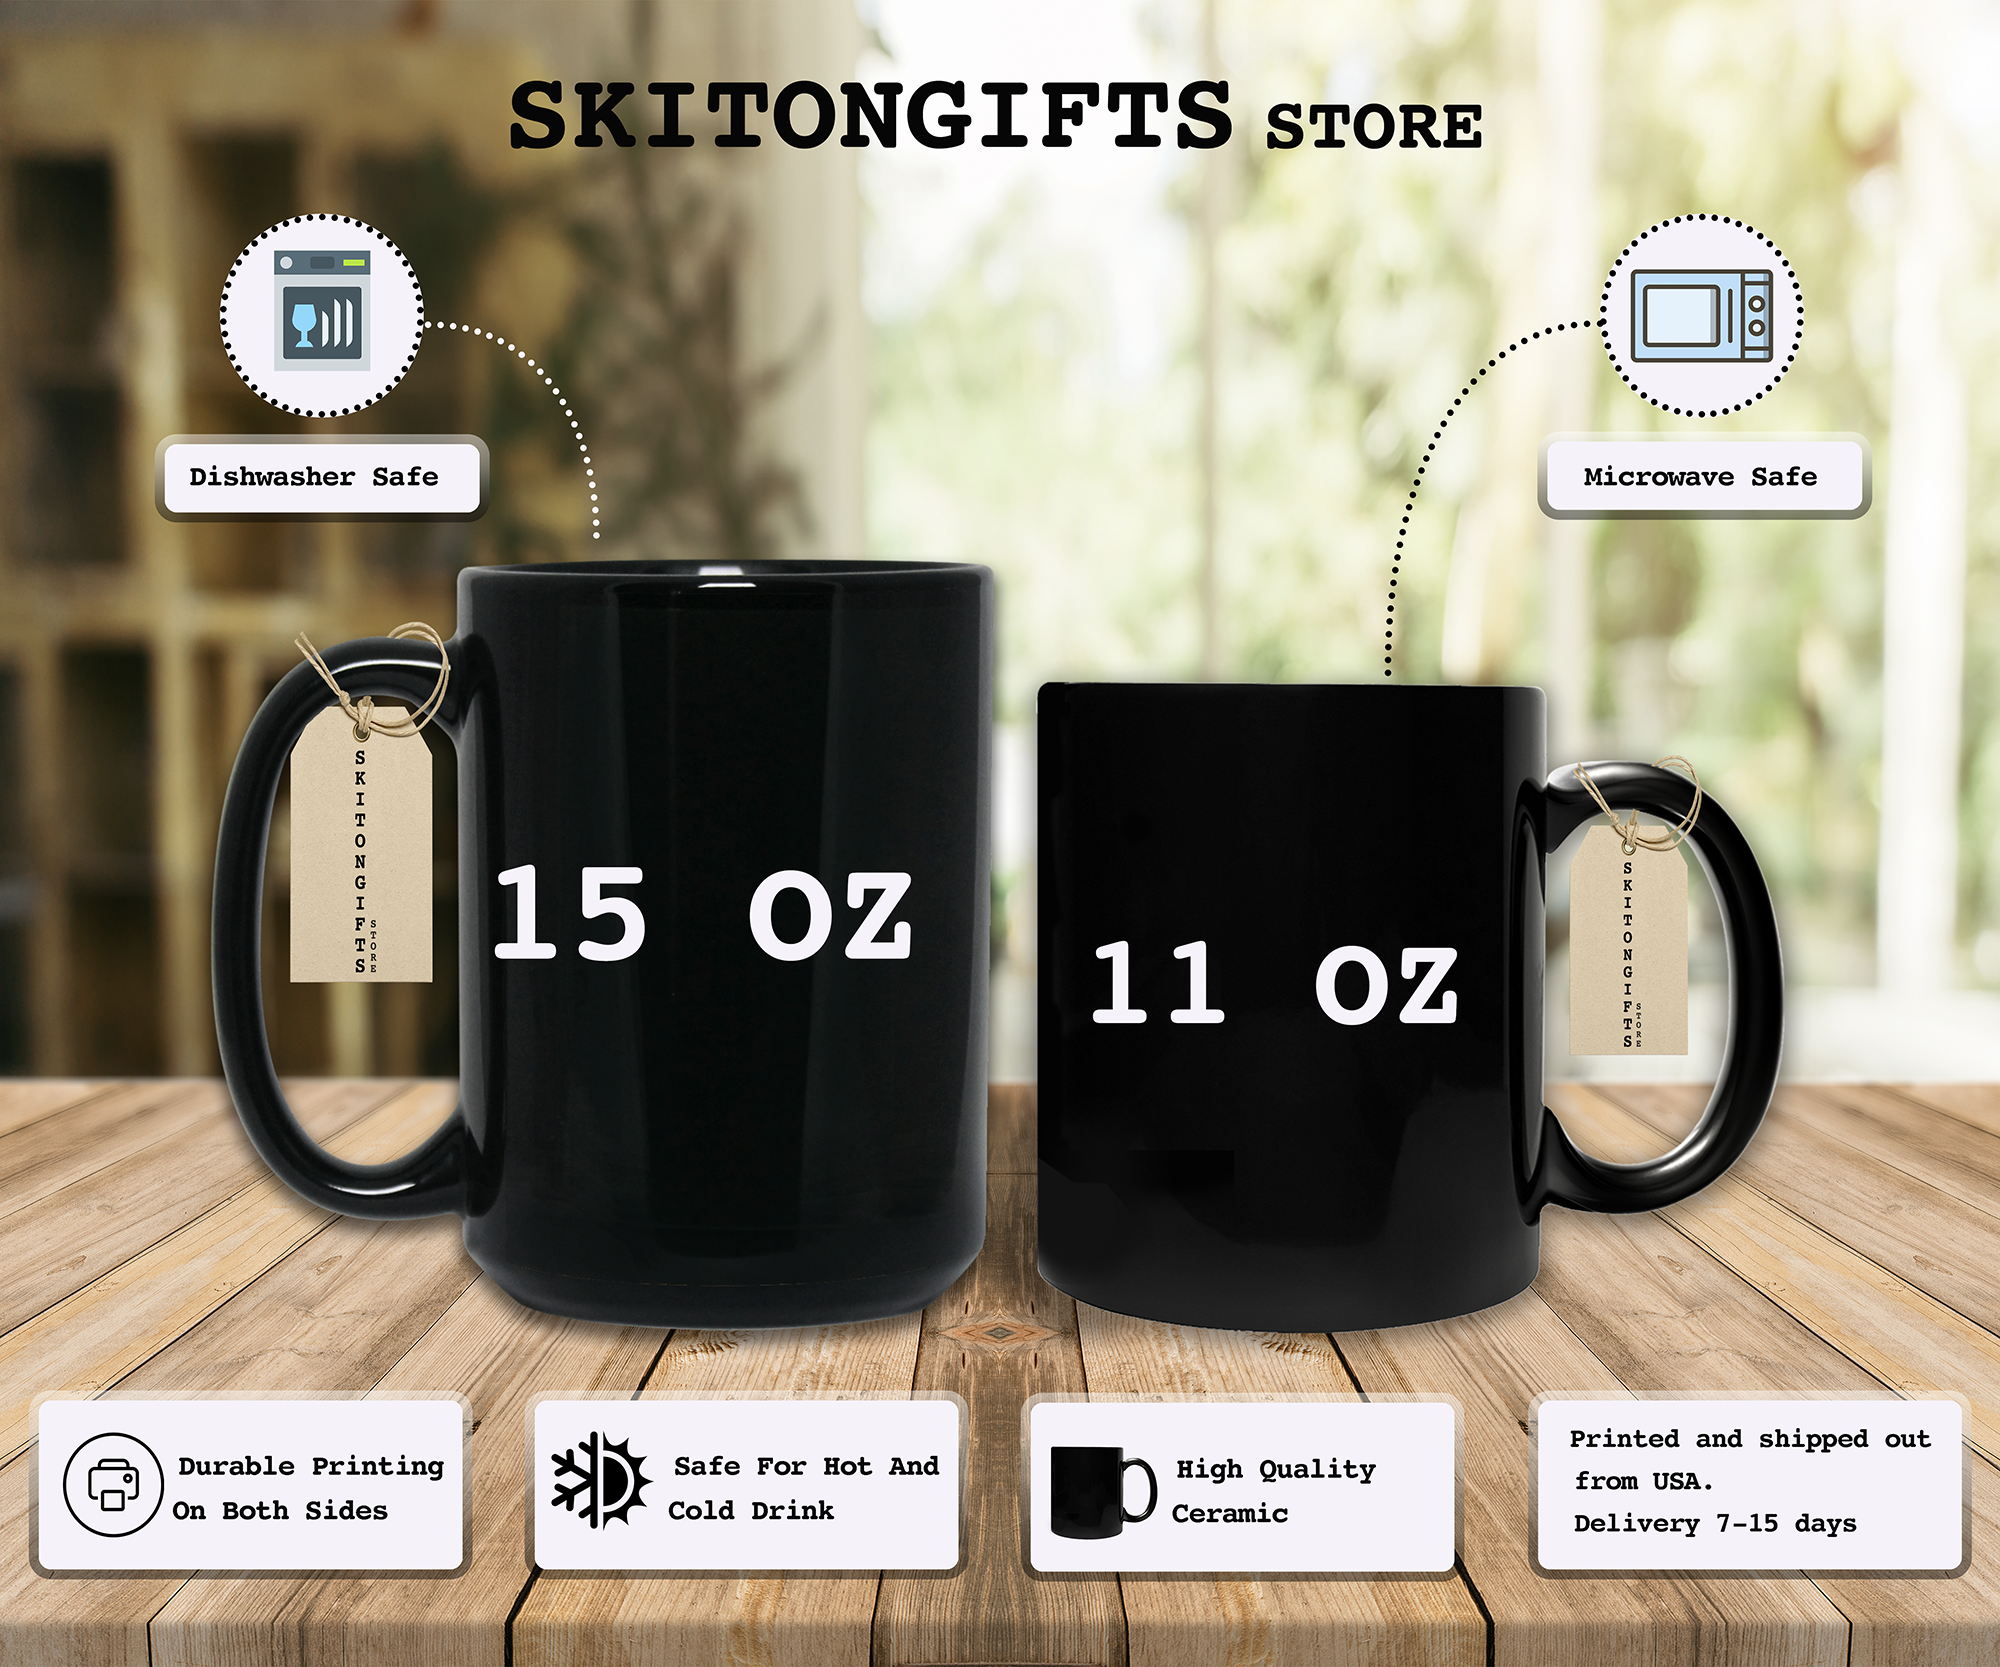 Skitongifts Funny Ceramic Novelty Coffee Mug You're My Person Funny For Greys Anatomy Fans hSBxxvy